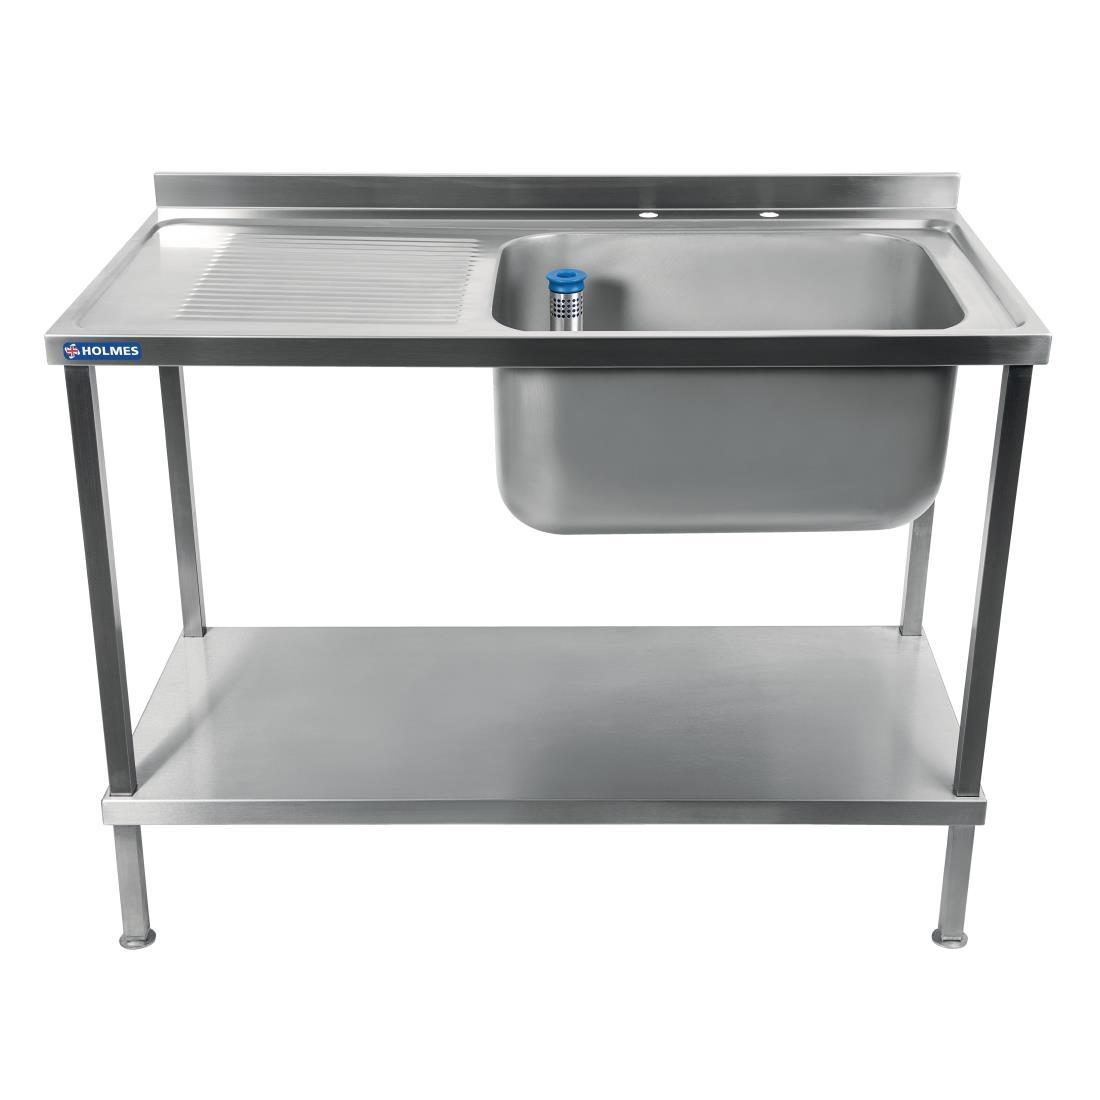 Holmes Fully Assembled Stainless Steel Sink Left Hand Drainer 1200mm - DR387  - 2